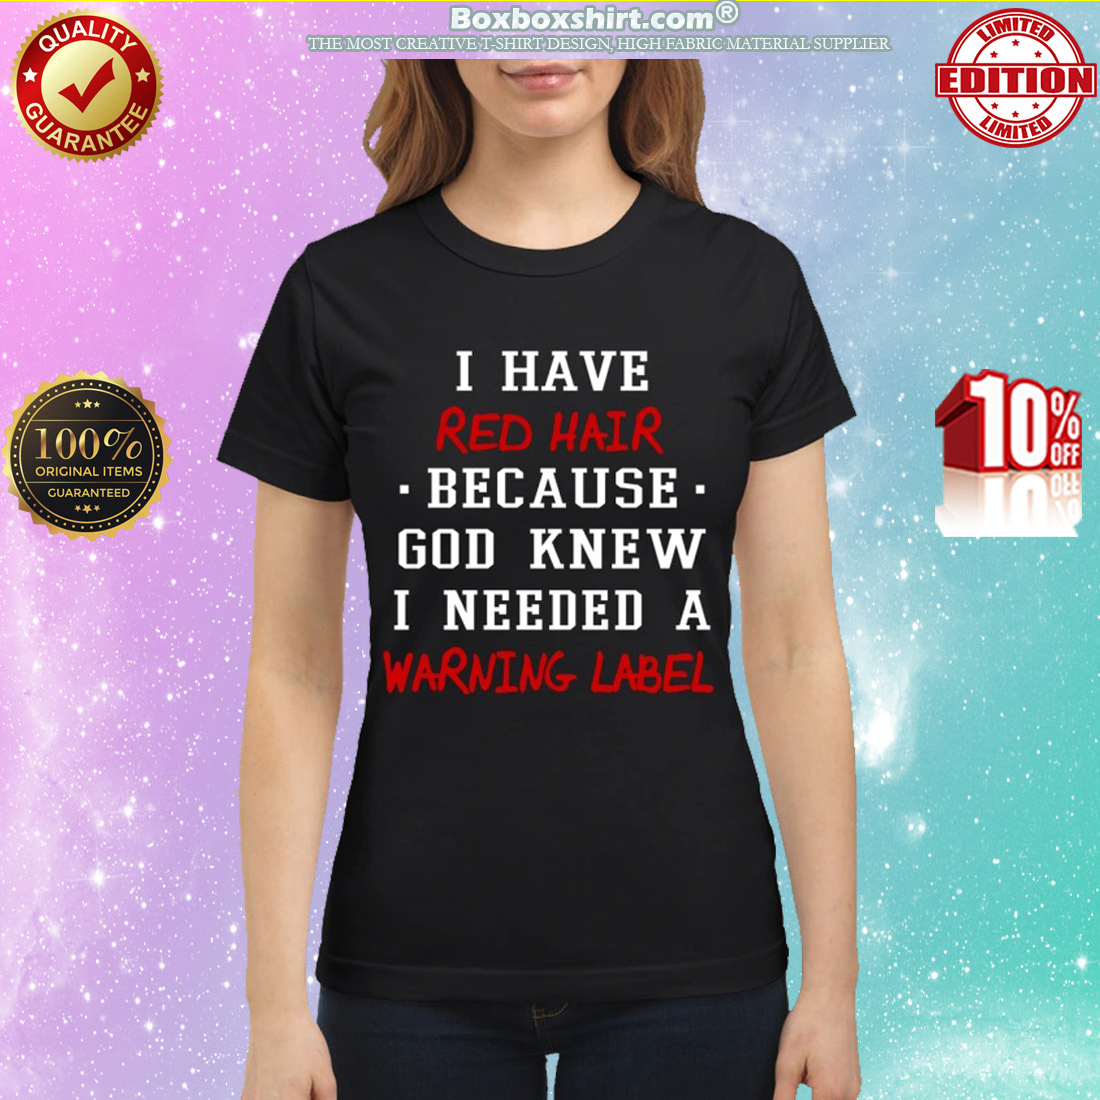 I have red hair because God knew I needed a warning label classic shirt